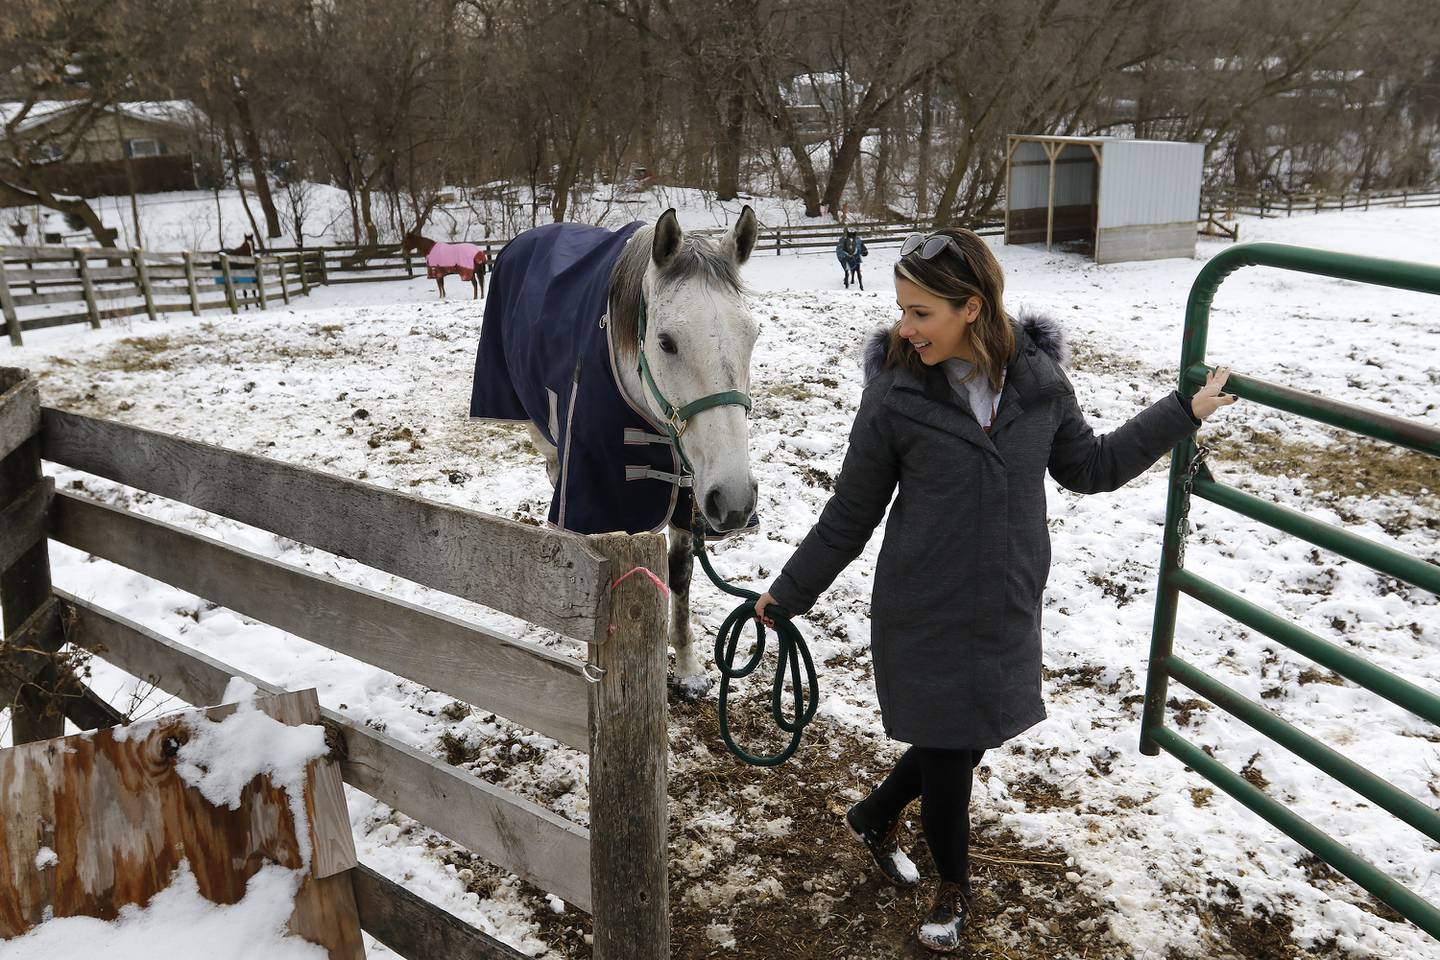 Alyssa Murphy leads out her horse "Lumos" at the horse barn on Tuesday, Jan. 4, 2022 in the Village of Trout Valley. Lumos has recently found fame on TikTok under Murphy's account, alyssa_ali123.